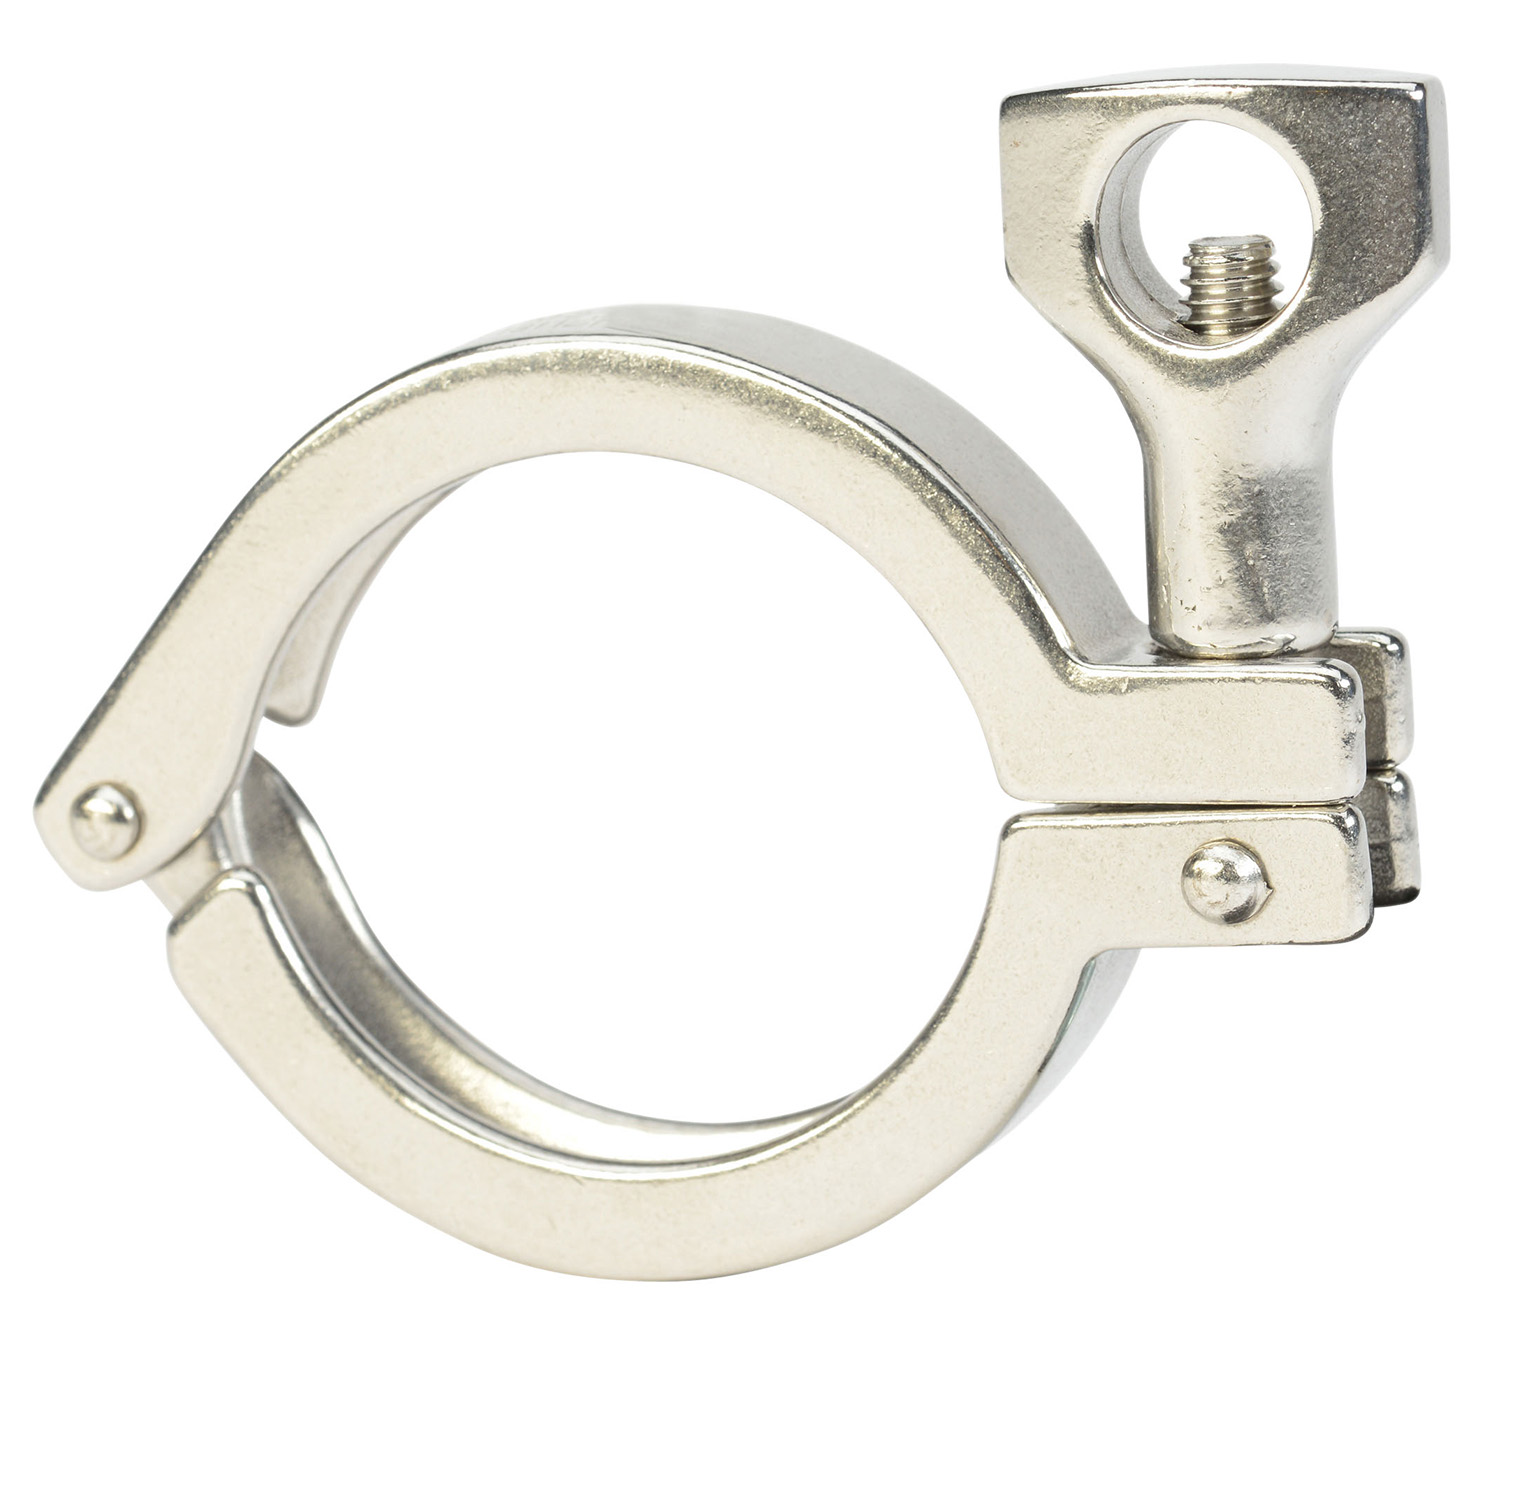 Sanitary Heavy Duty Wing Nut Clamps